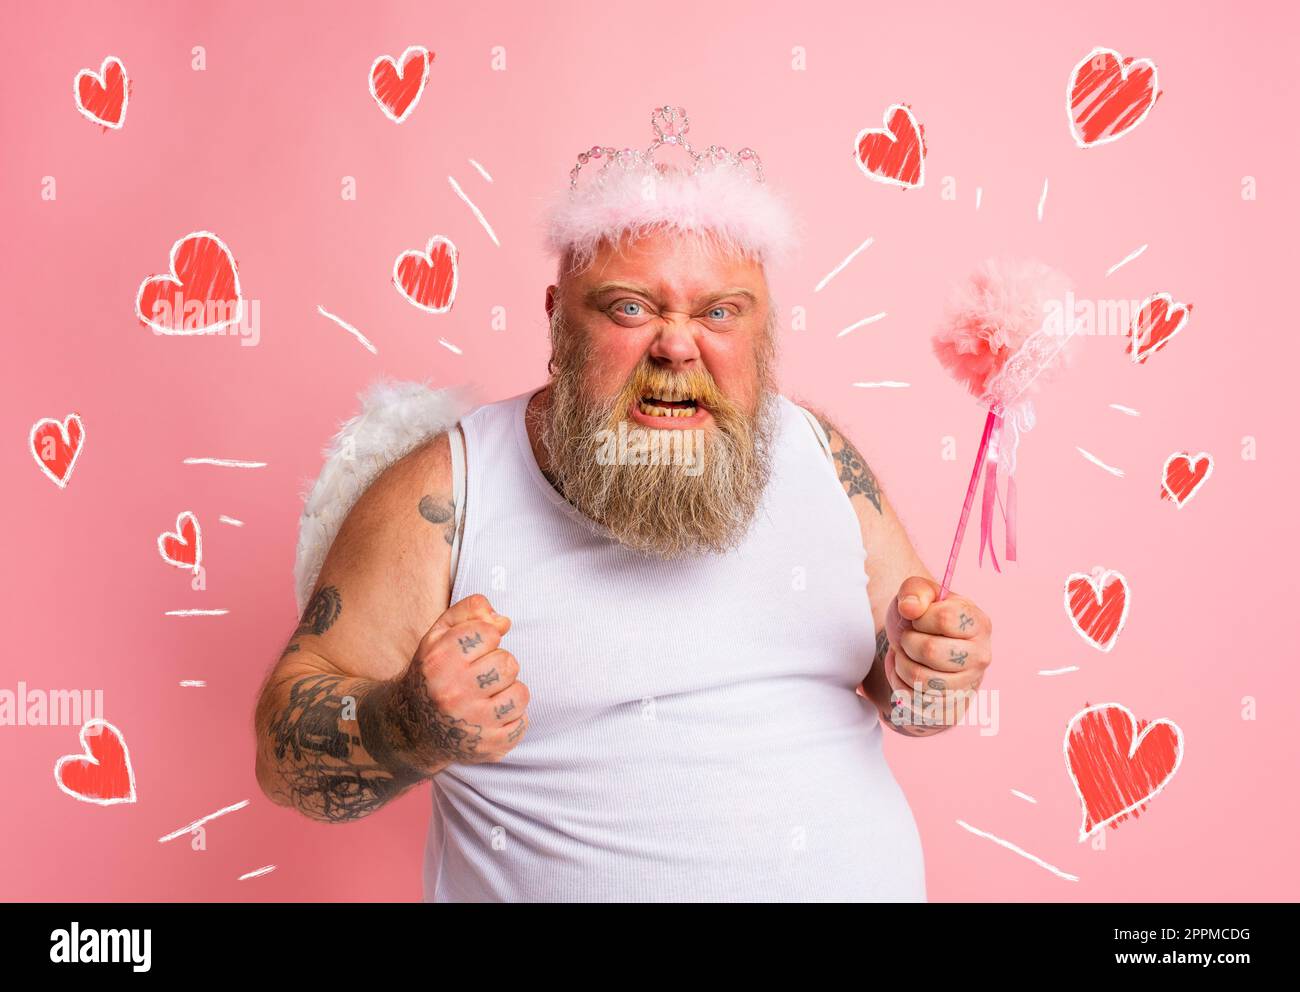 Fat angry man with tattoos acts like a magical fairy Stock Photo